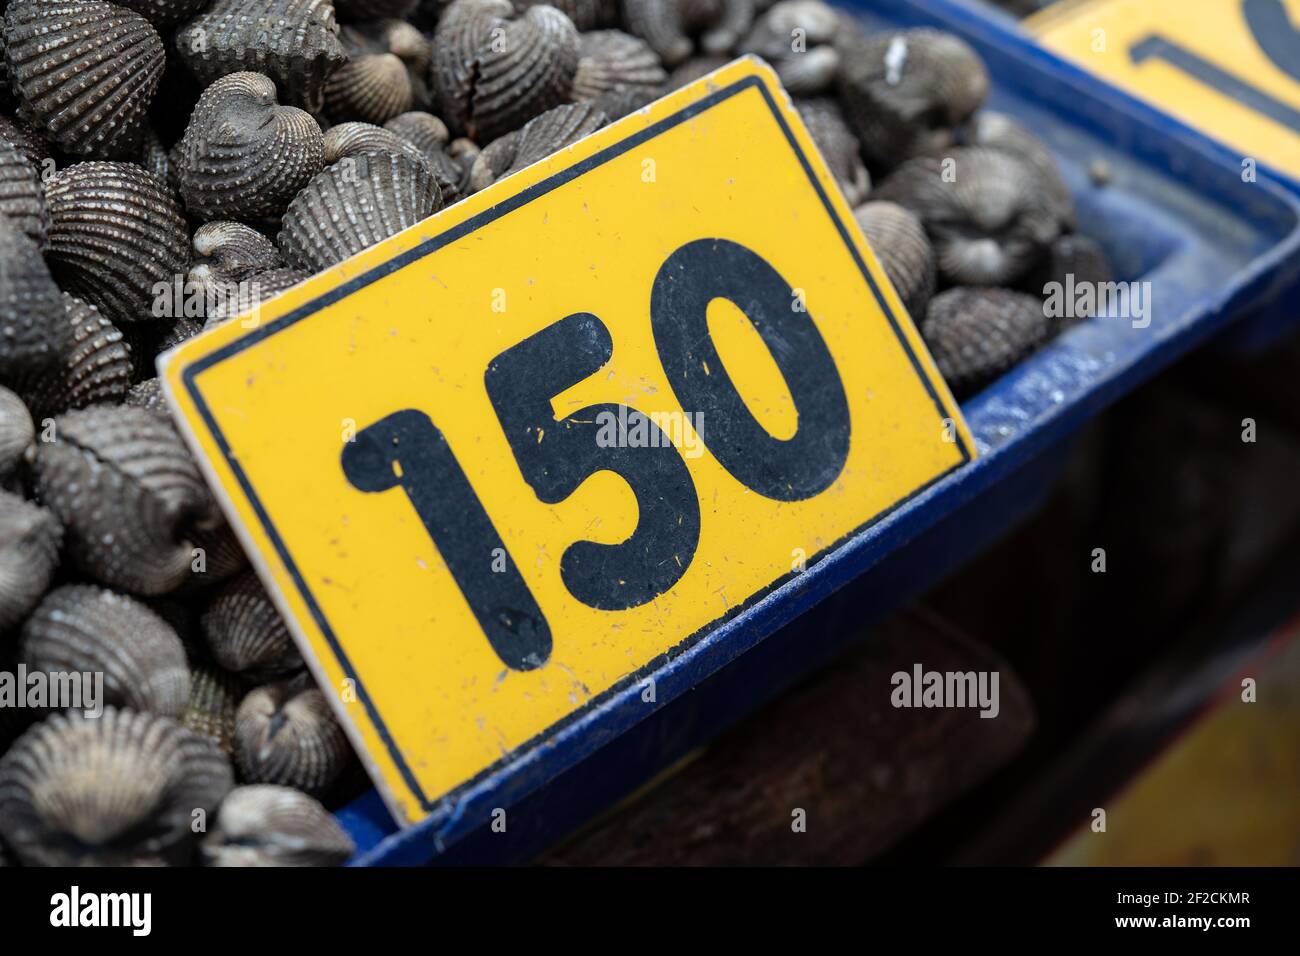 Cockles seafood pile or scallop fresh raw shellfish in fresh market on ice for sales. Stock Photo